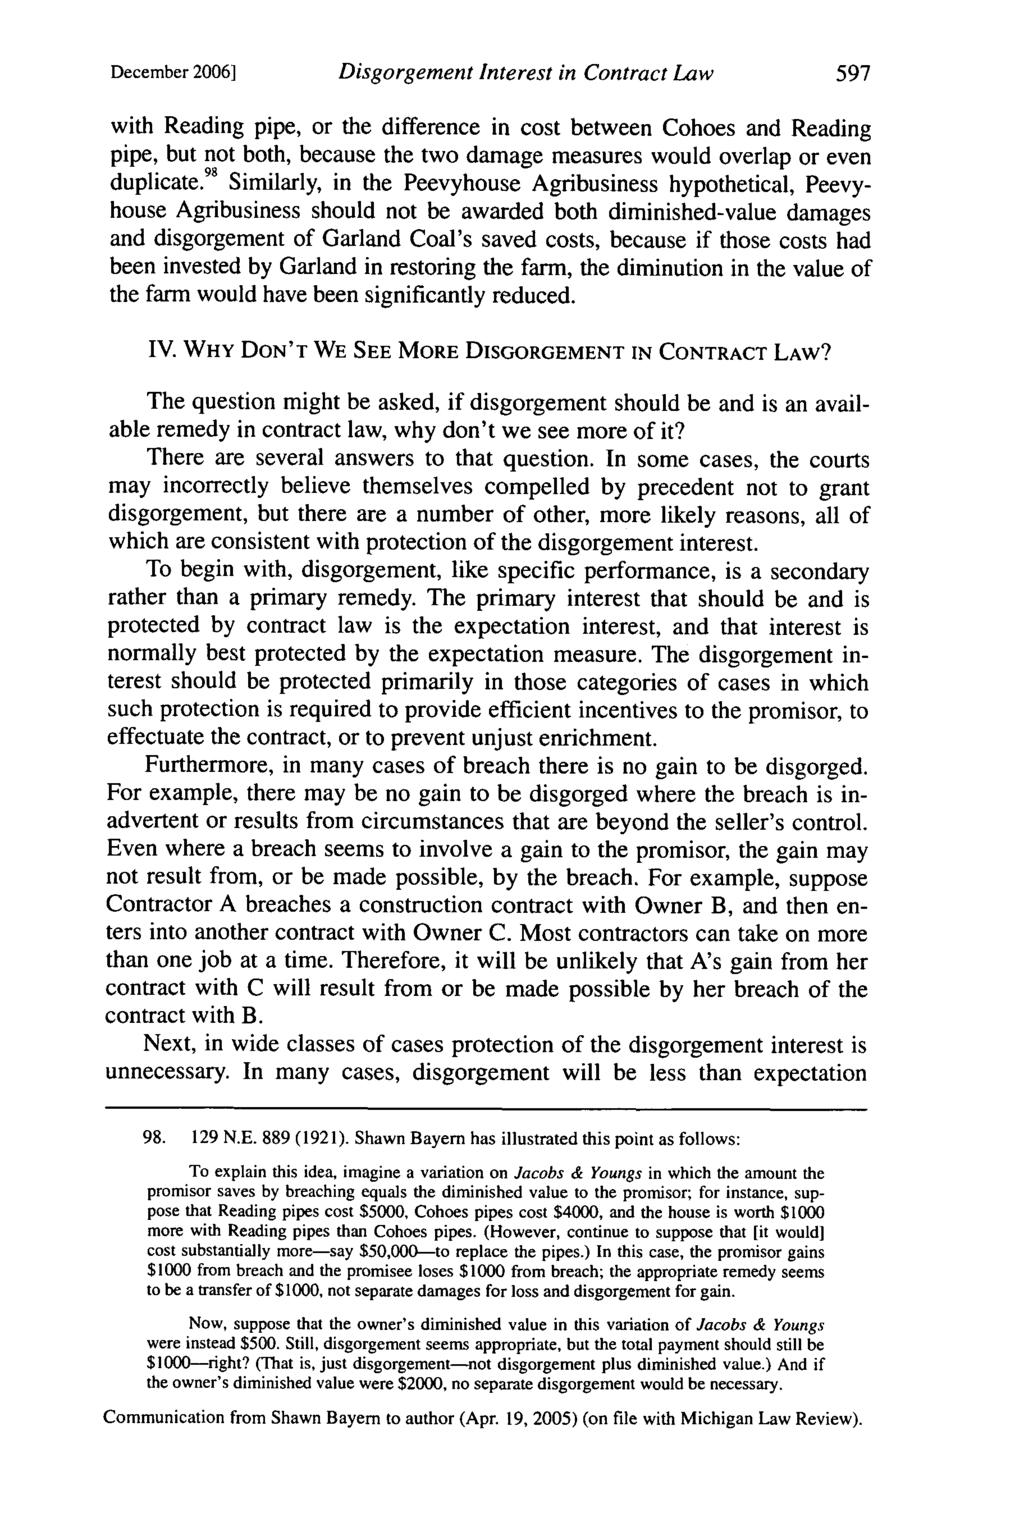 December 20061 Disgorgement Interest in Contract Law with Reading pipe, or the difference in cost between Cohoes and Reading pipe, but not both, because the two damage measures would overlap or even